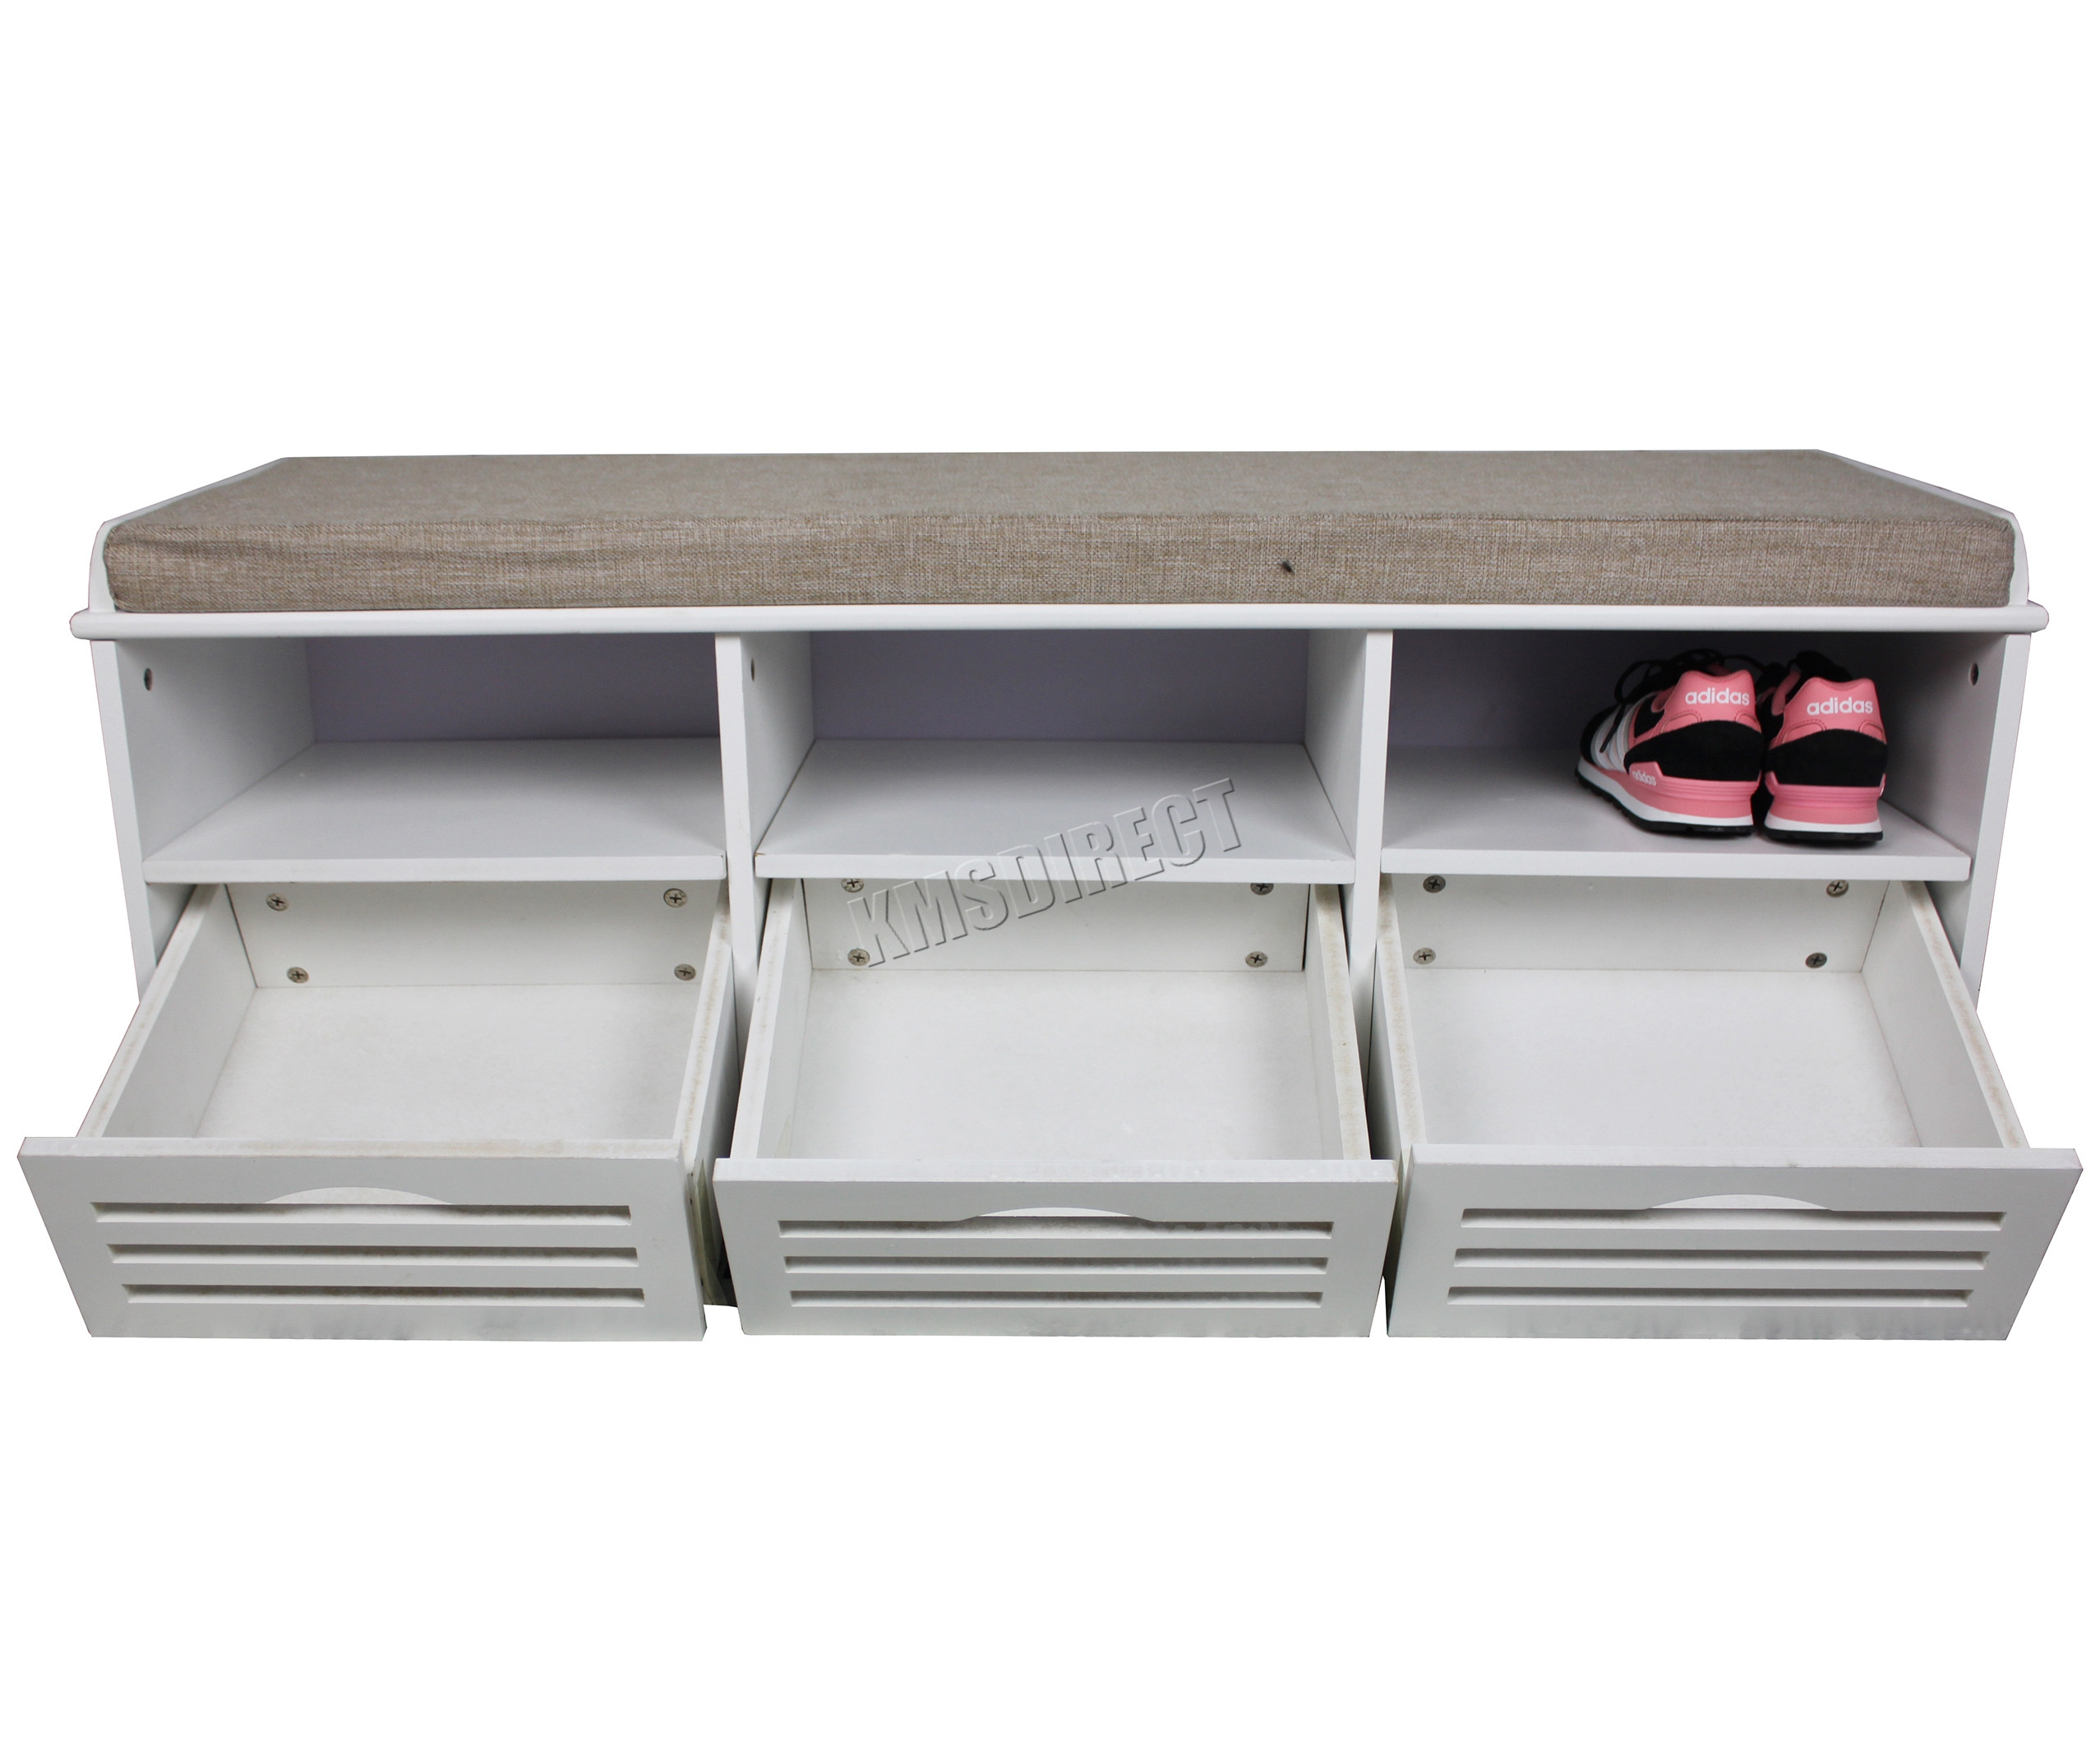 White Storage Bench With Drawers
 FoxHunter Shoe Storage Bench With Drawers Padded Seat